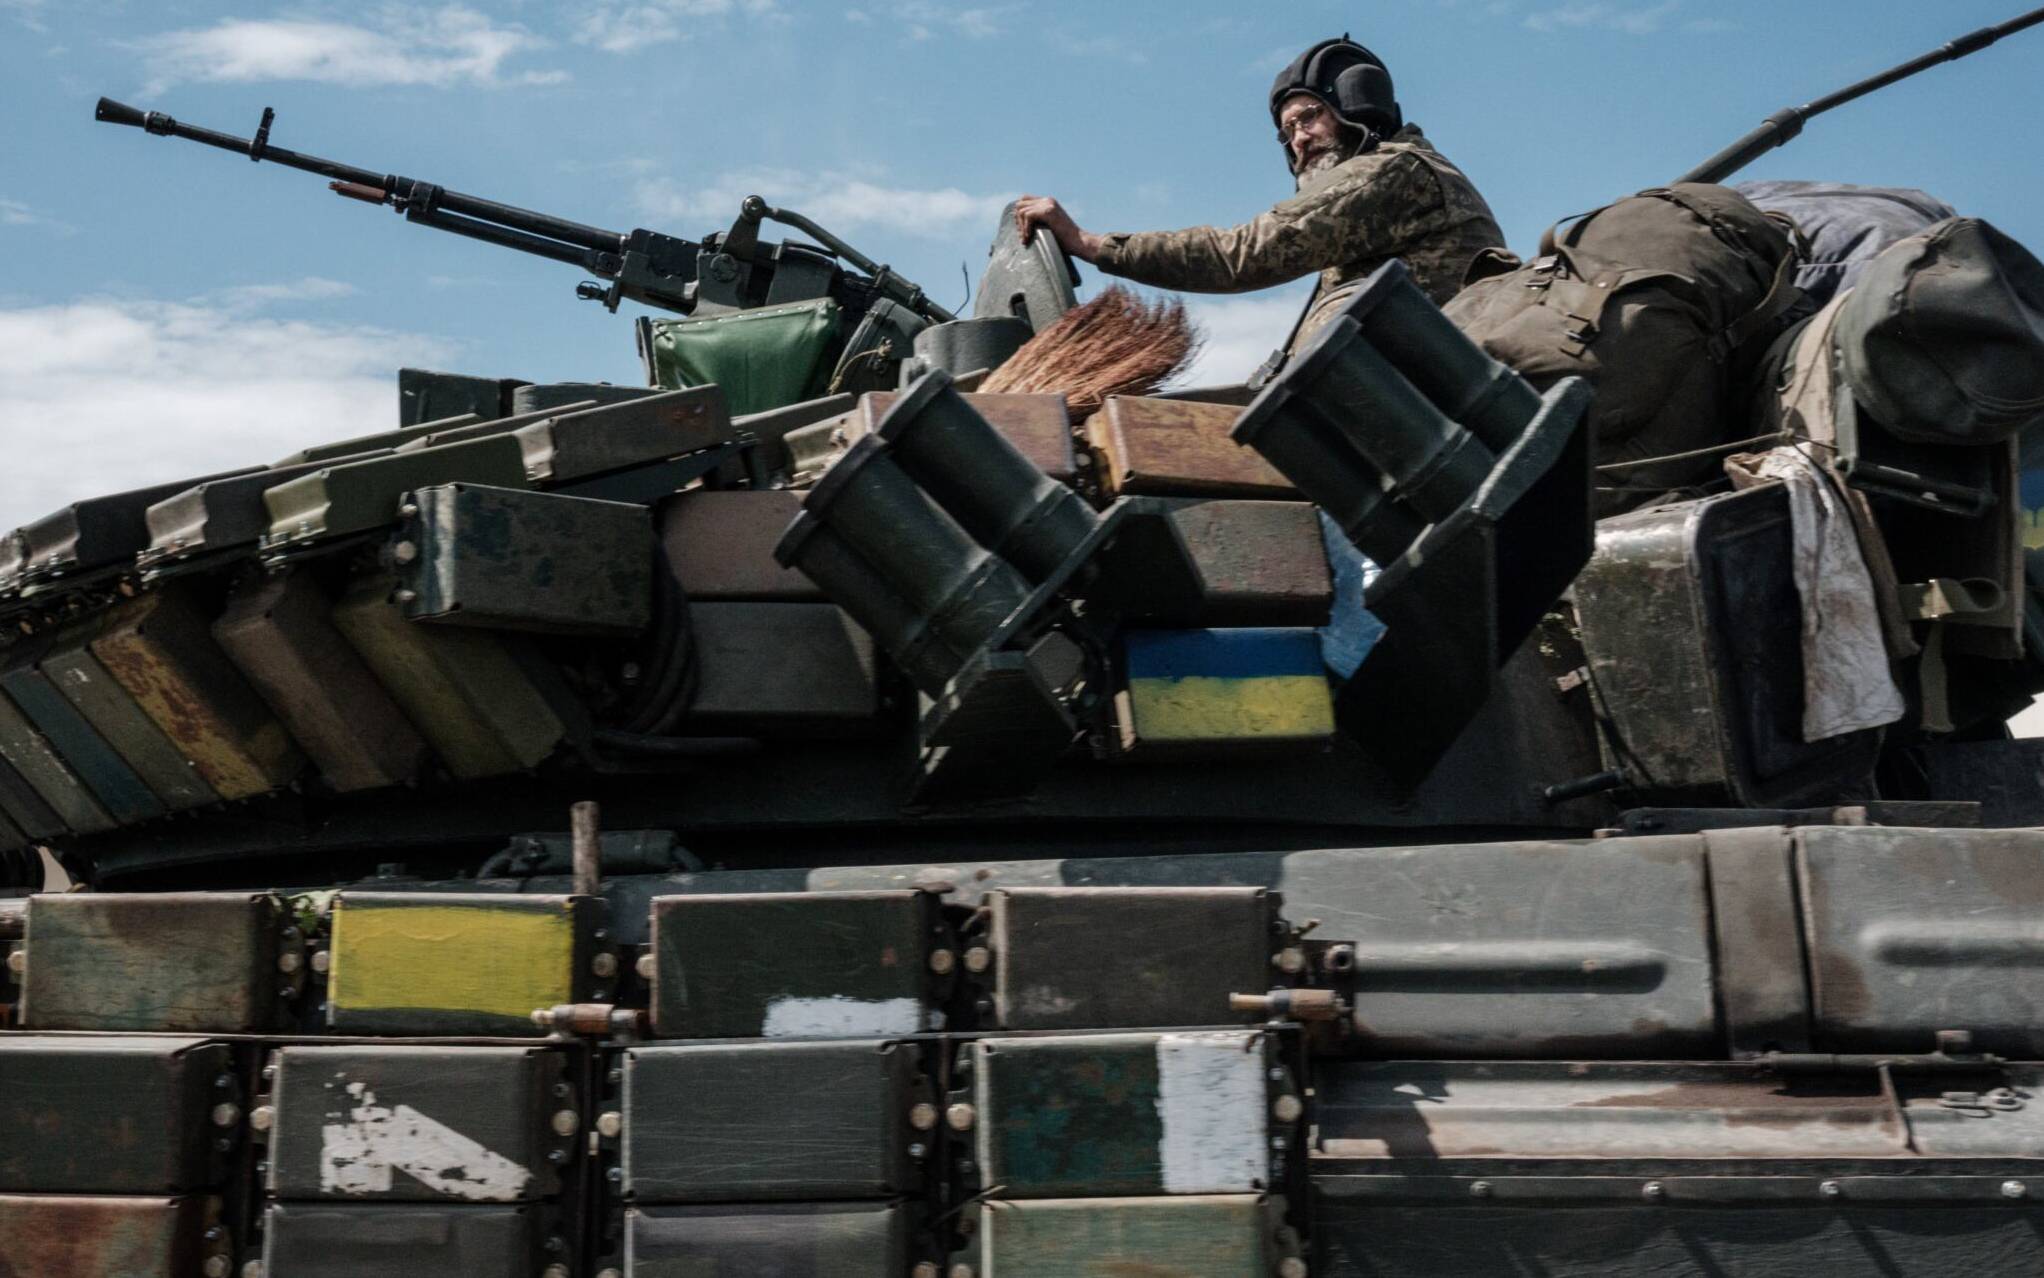 A Ukrainian soldier sits on a tank carryied by a transporter near Bakhmut, eastern Ukraine, on May 12, 2022, amid the Russian invasion of Ukraine. (Photo by Yasuyoshi CHIBA / AFP)